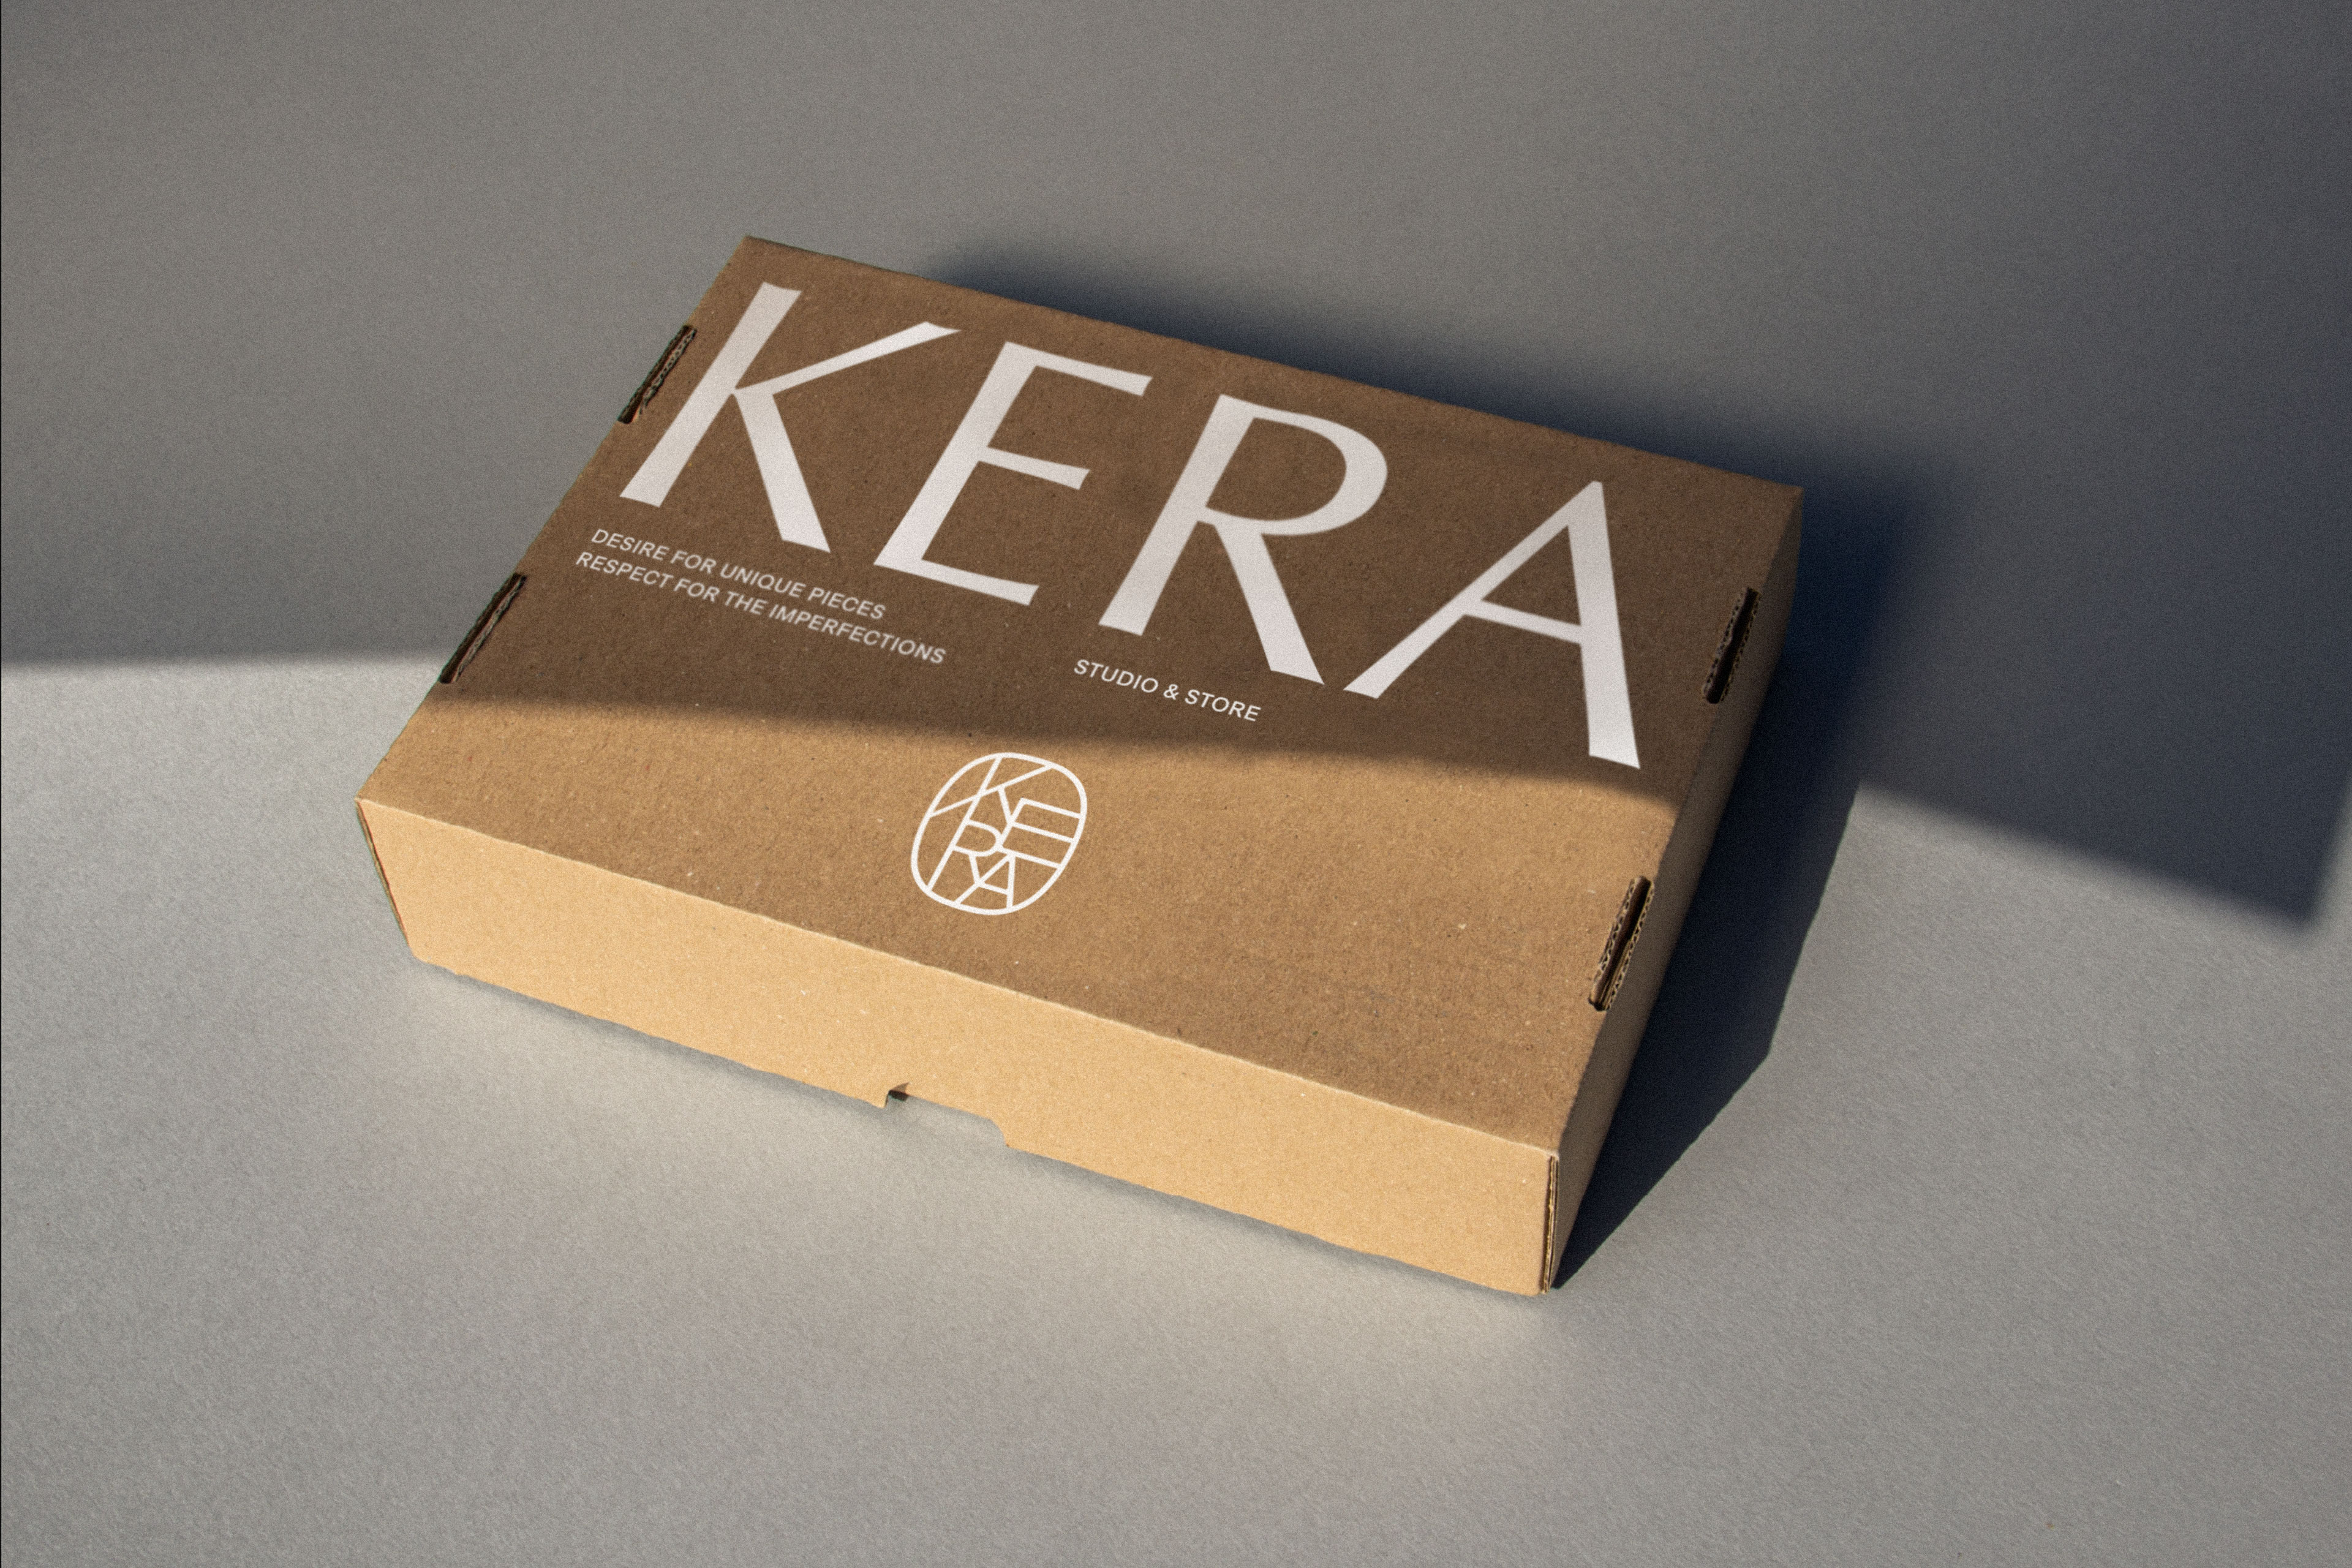 A cardboard box with the word kera on it.